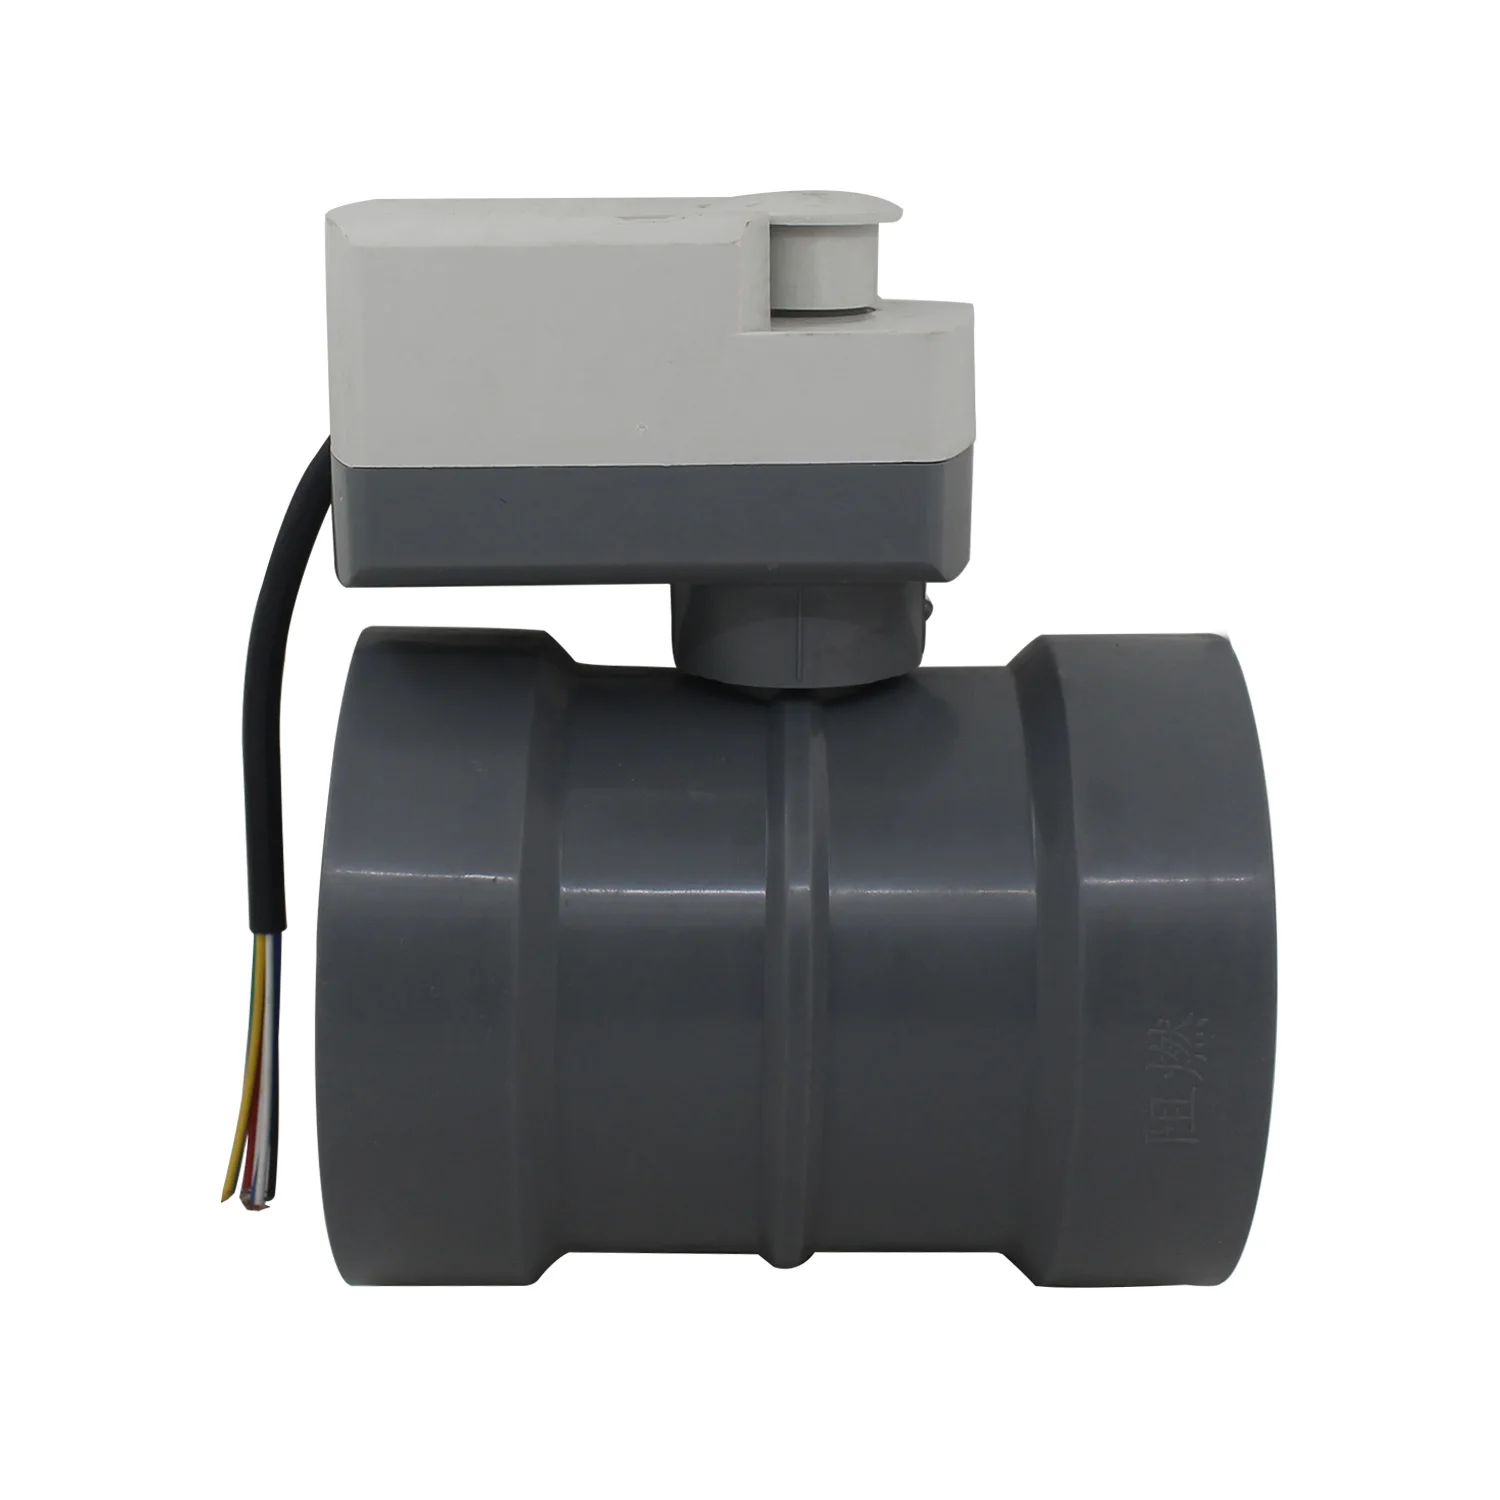 

PVC Electric Air Duct Value 110-310 Mm Diam Air Damper Valve Motorized Pipe Valve with 220V Actuator for HVAC ventilation system